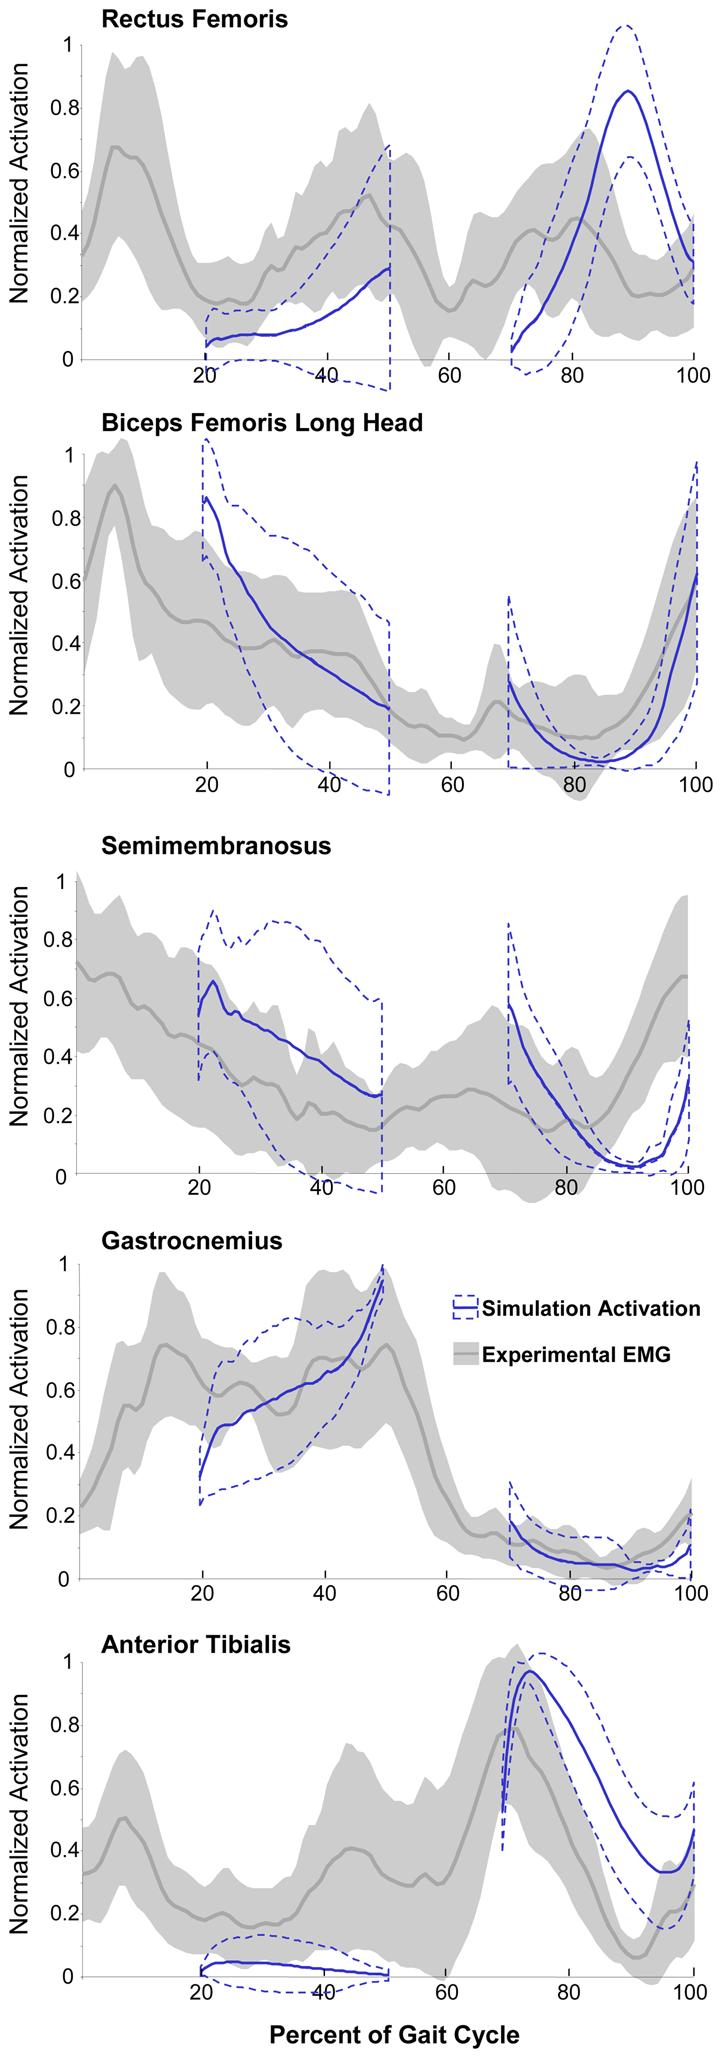 Steele et al. Page 11 Figure 3. Comparison of EMG and simulated activation for the 9 crouch gait subjects for whom EMG data were available.